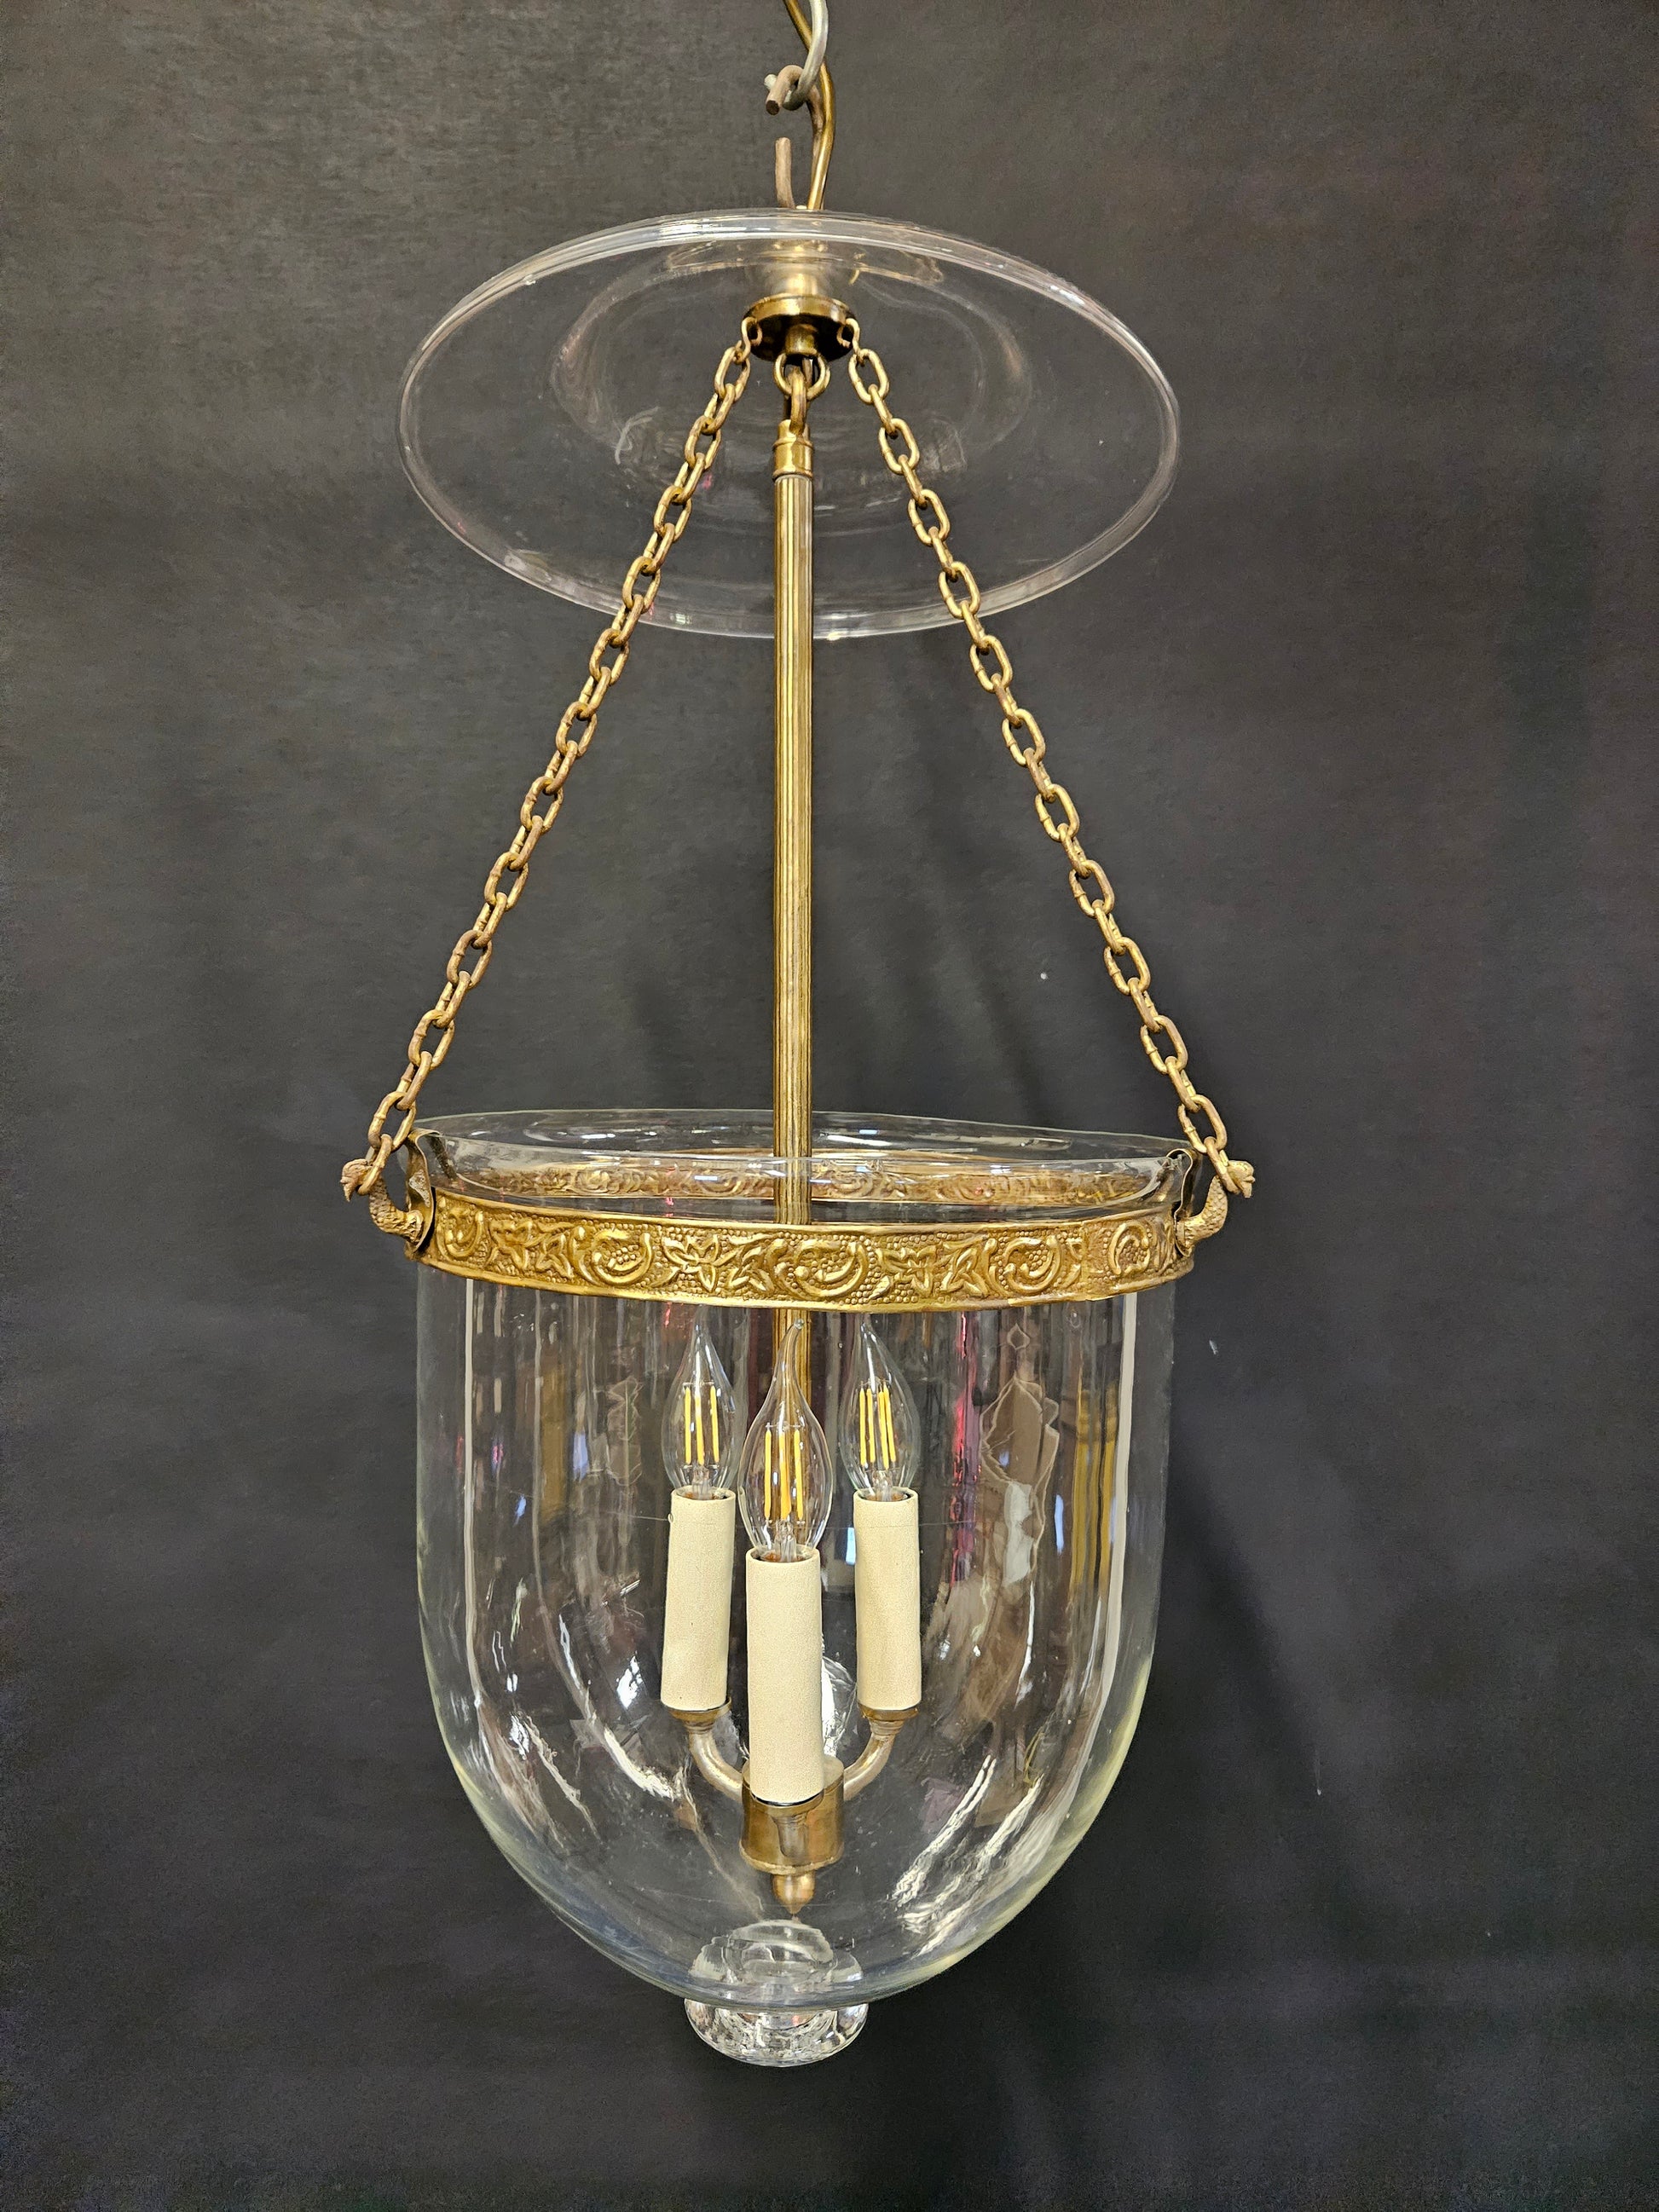 front view of bell lantern